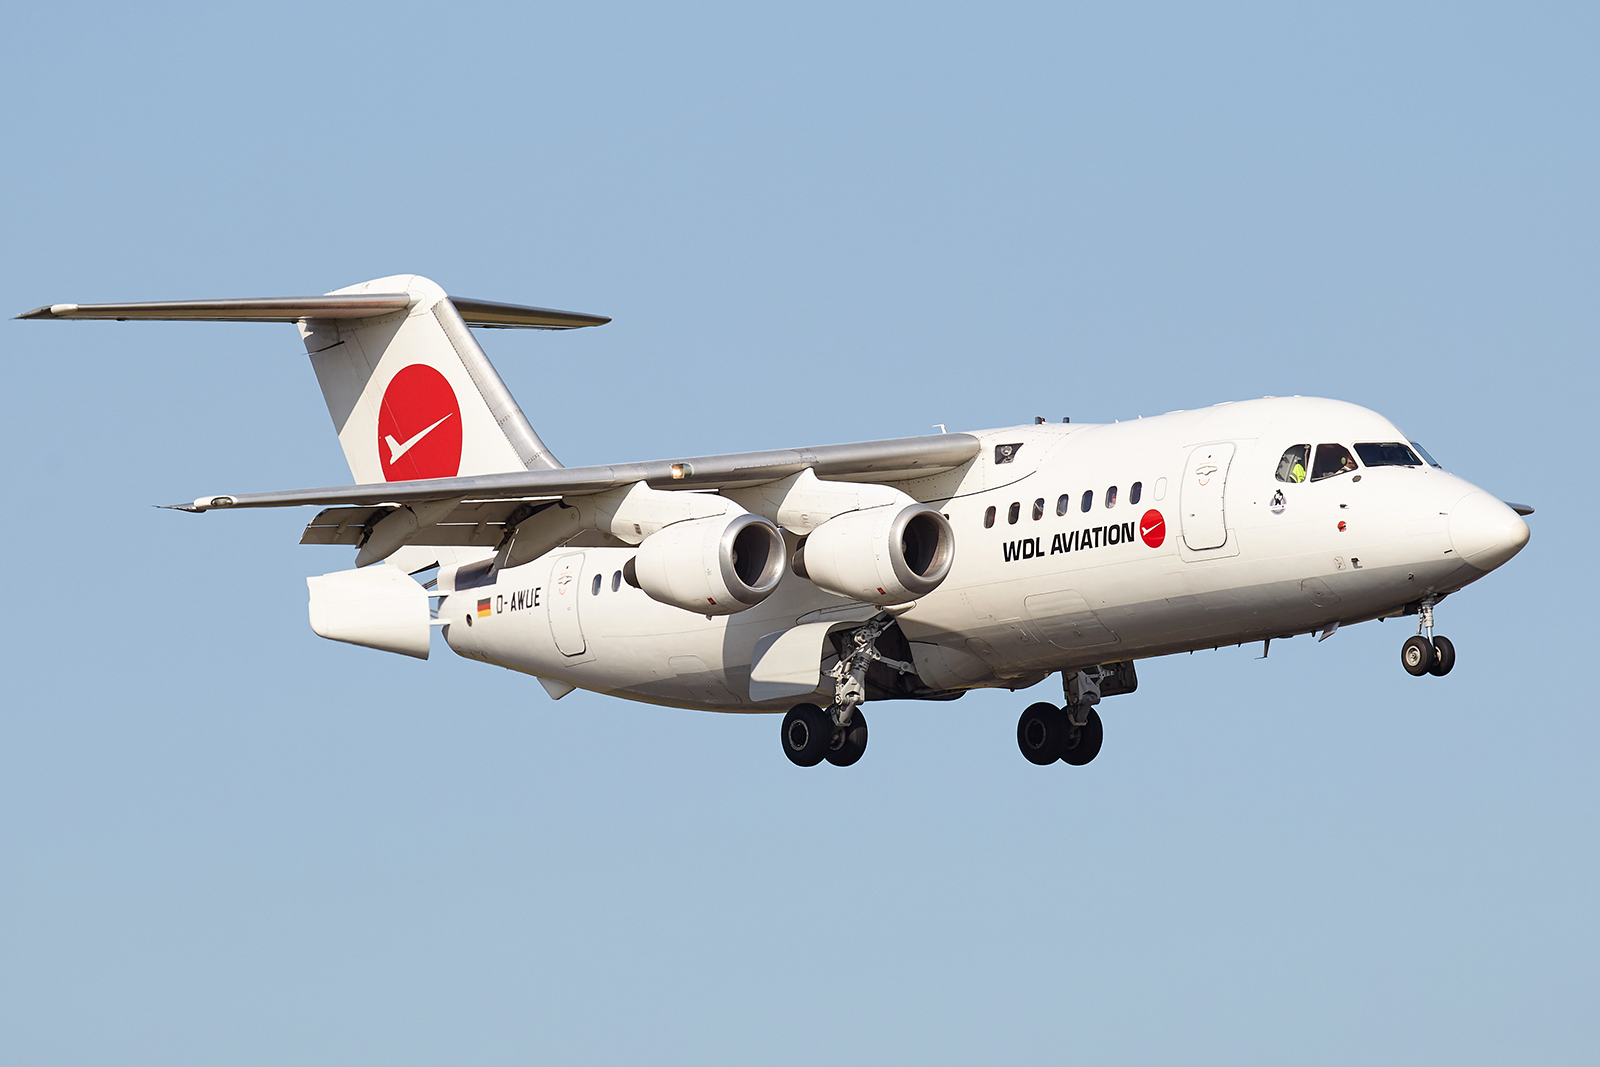  [02/06/2019] Bae145 (D-AWUE) WDL Aviation 1906040541225493216262182